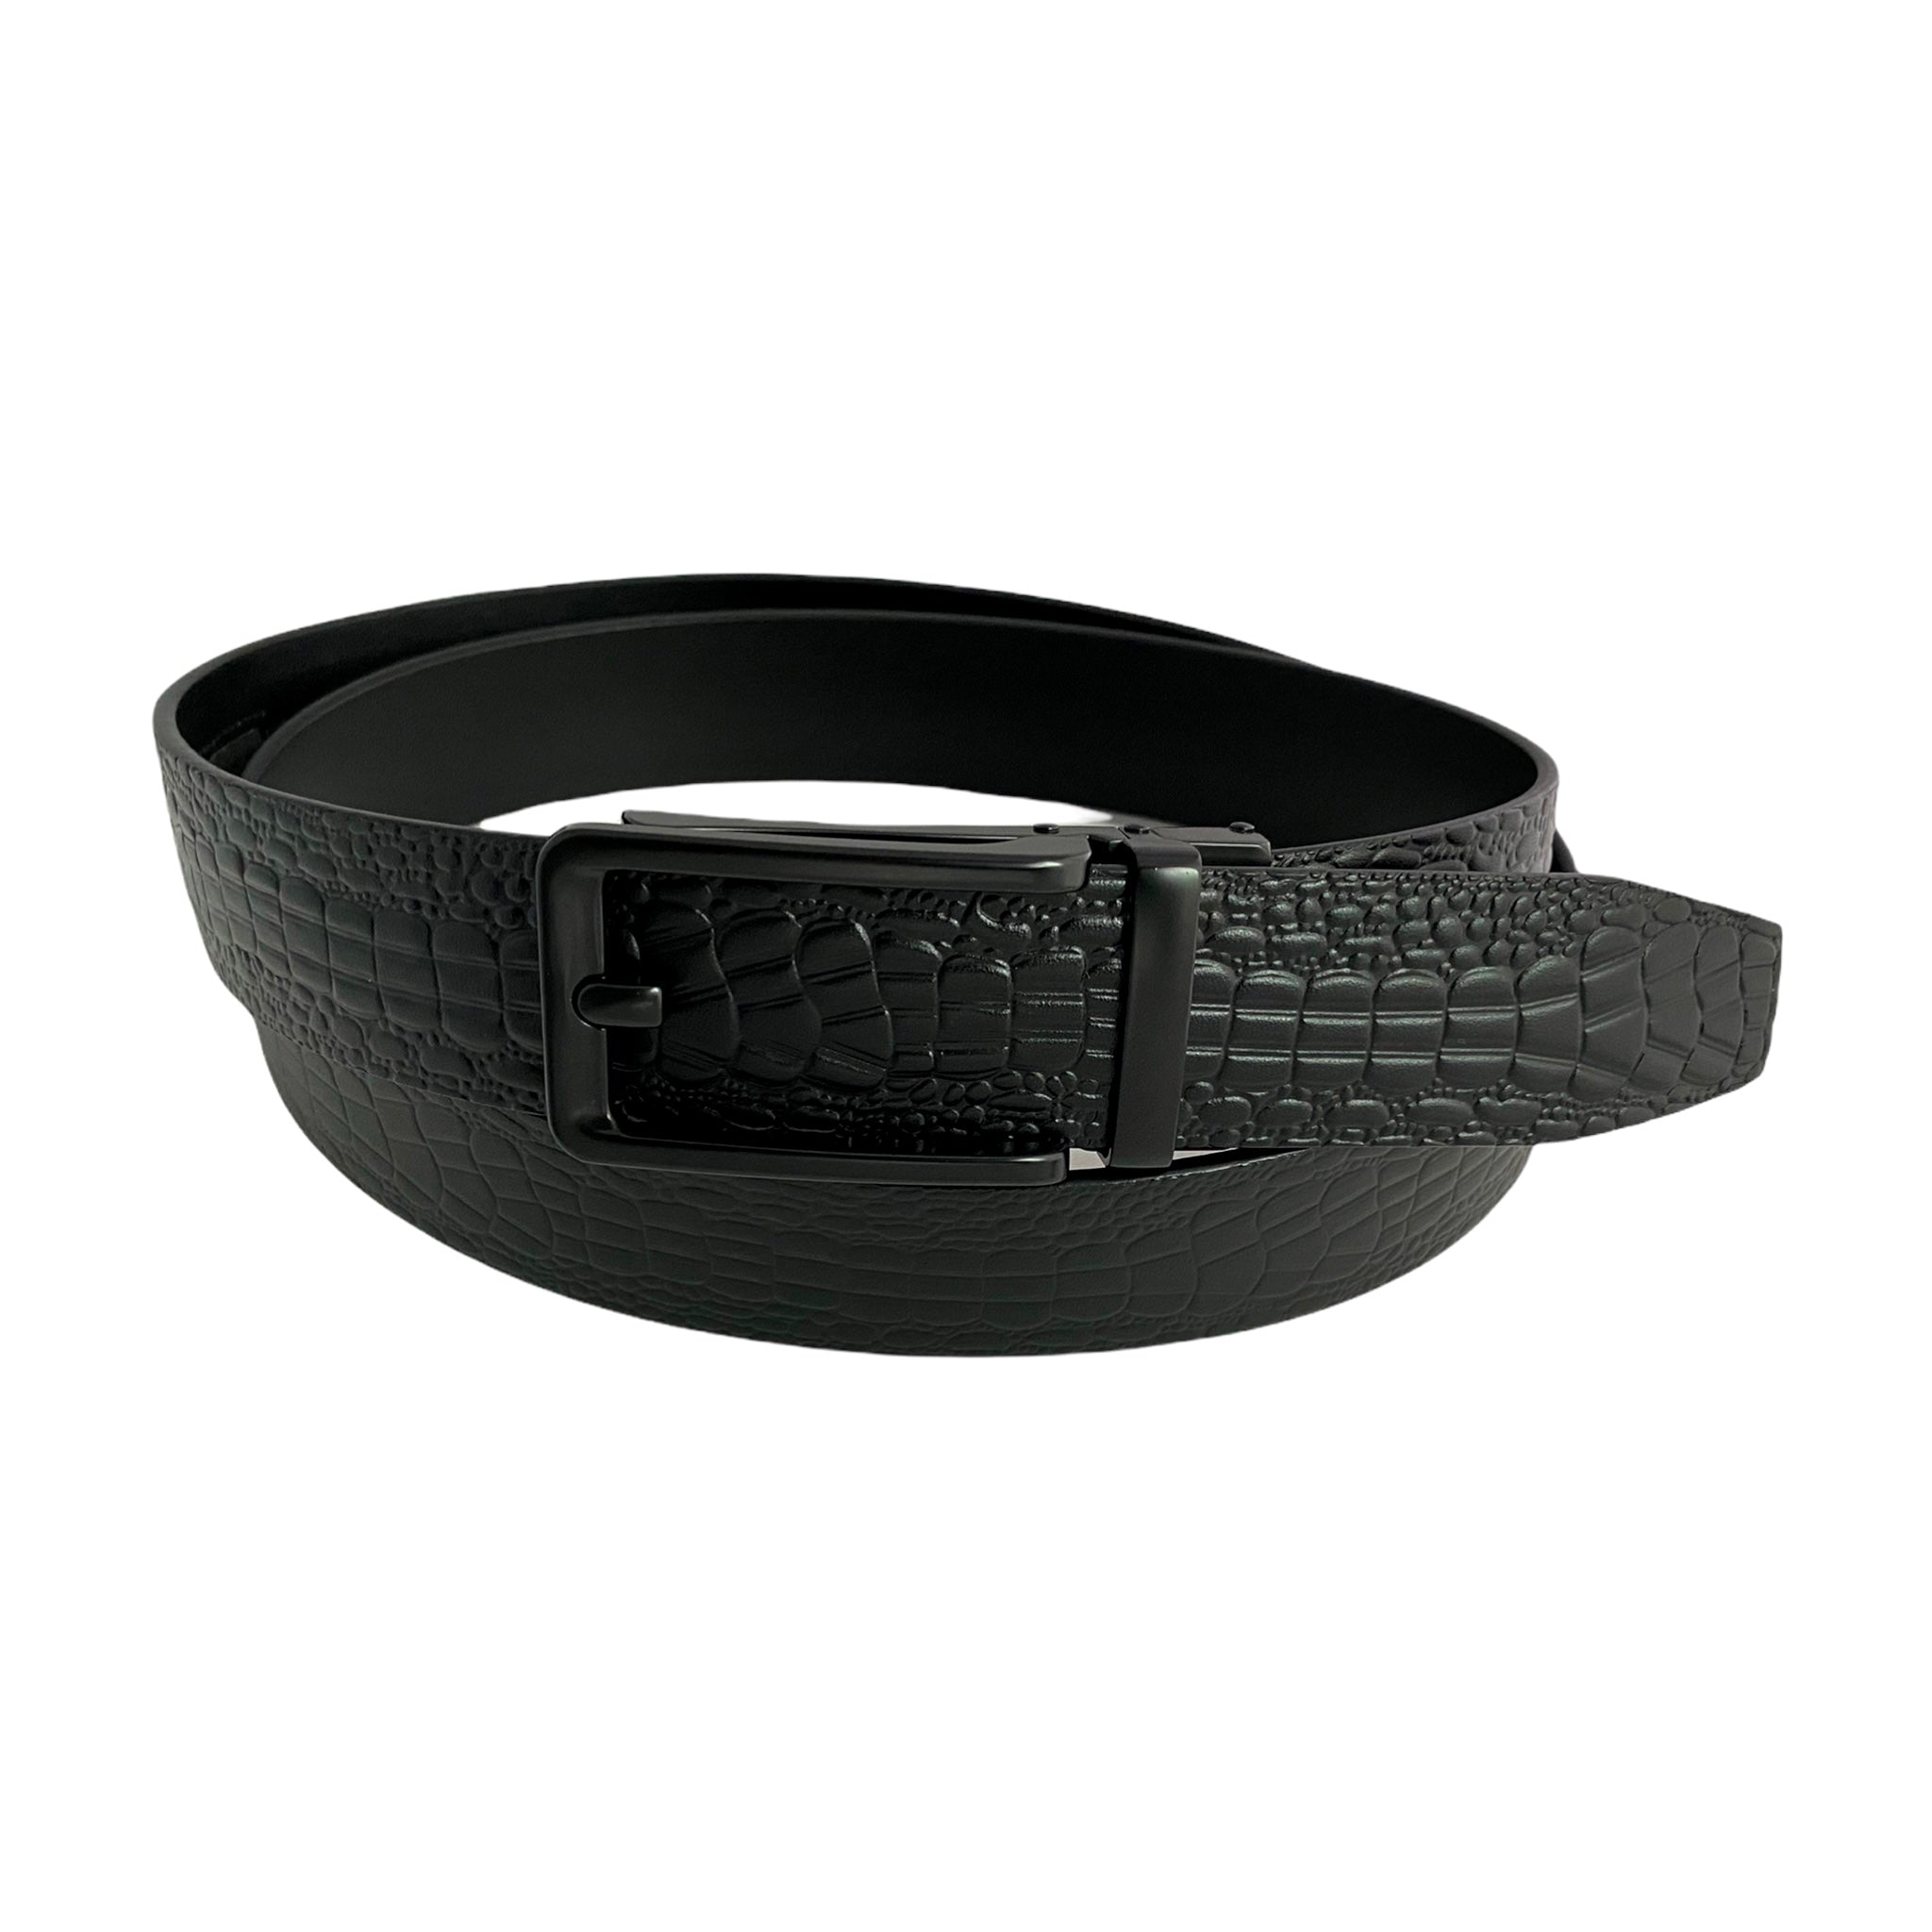 1.38" Genuine Leather Black Textured Strap And 1.38" Automatic Buckle Black Hollow 24710979584151